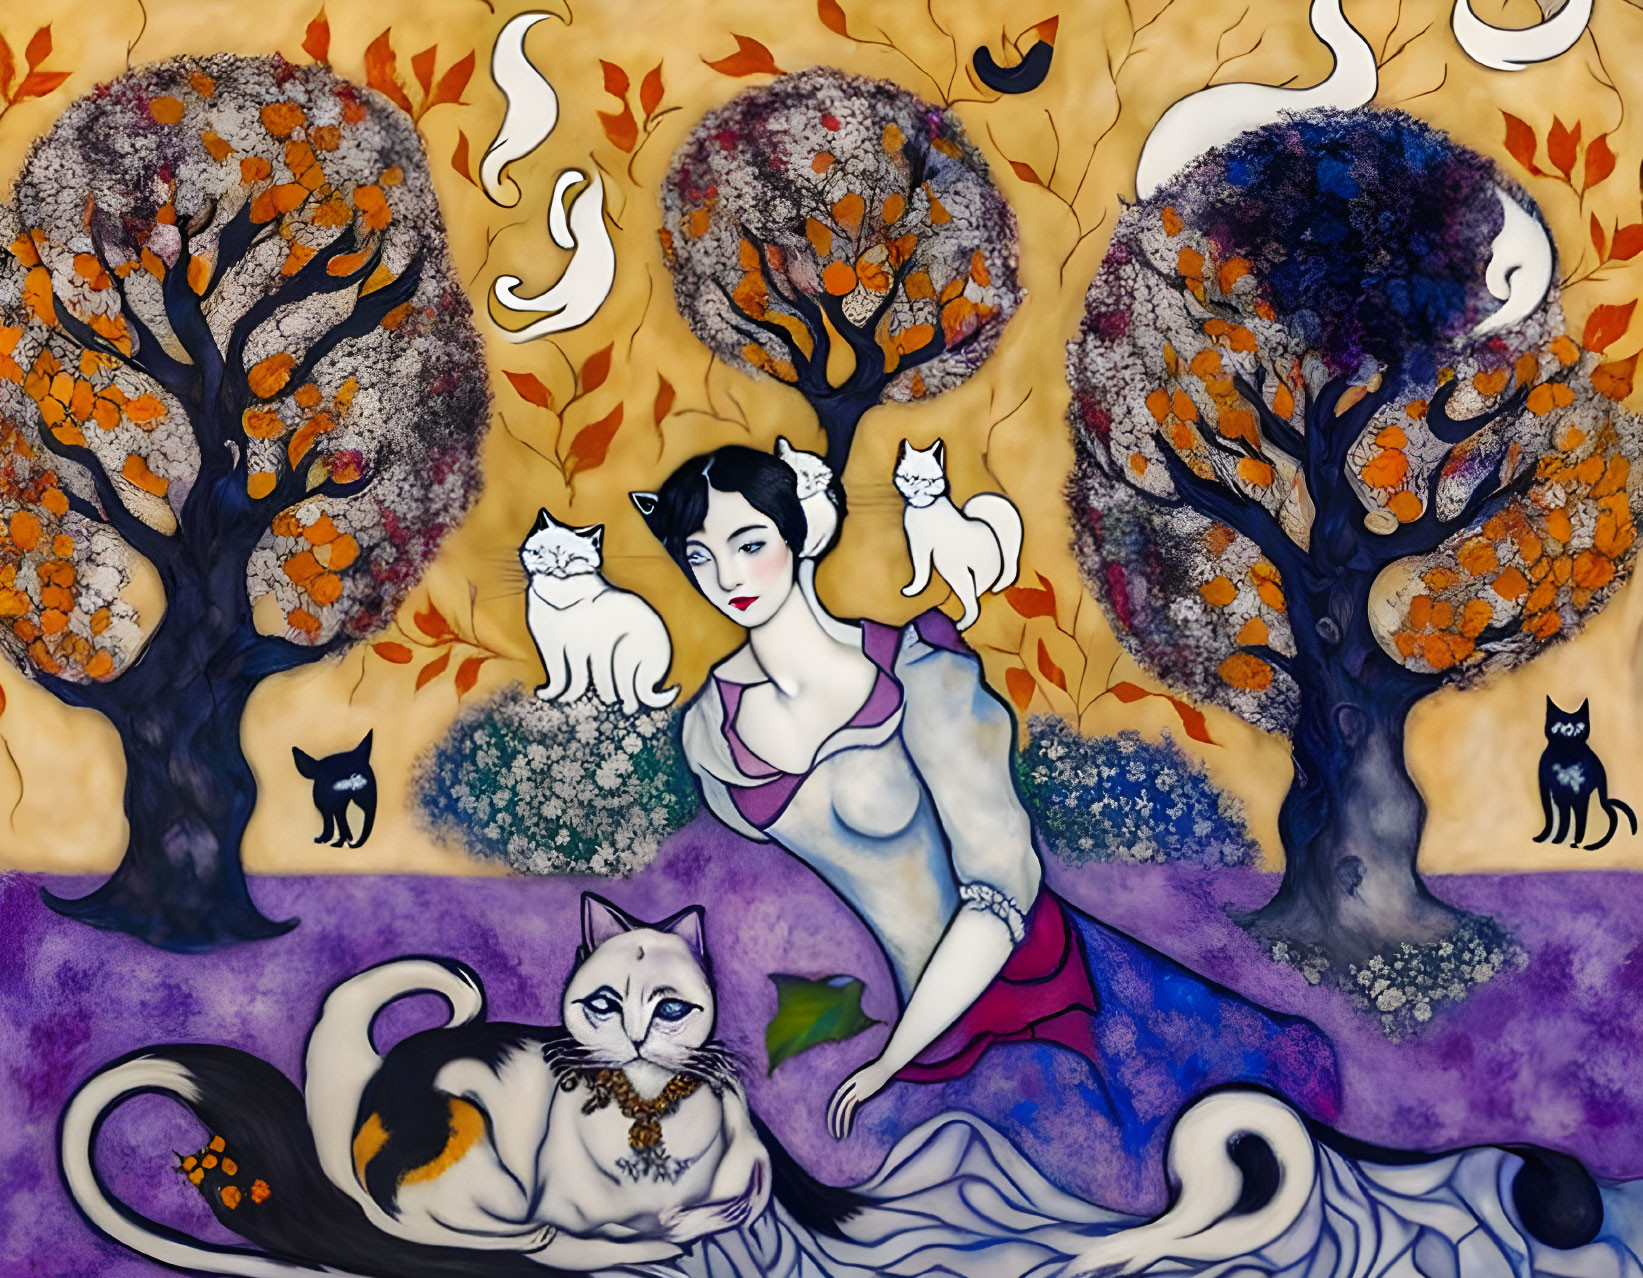 Woman with Cats in Whimsical Fall Landscape